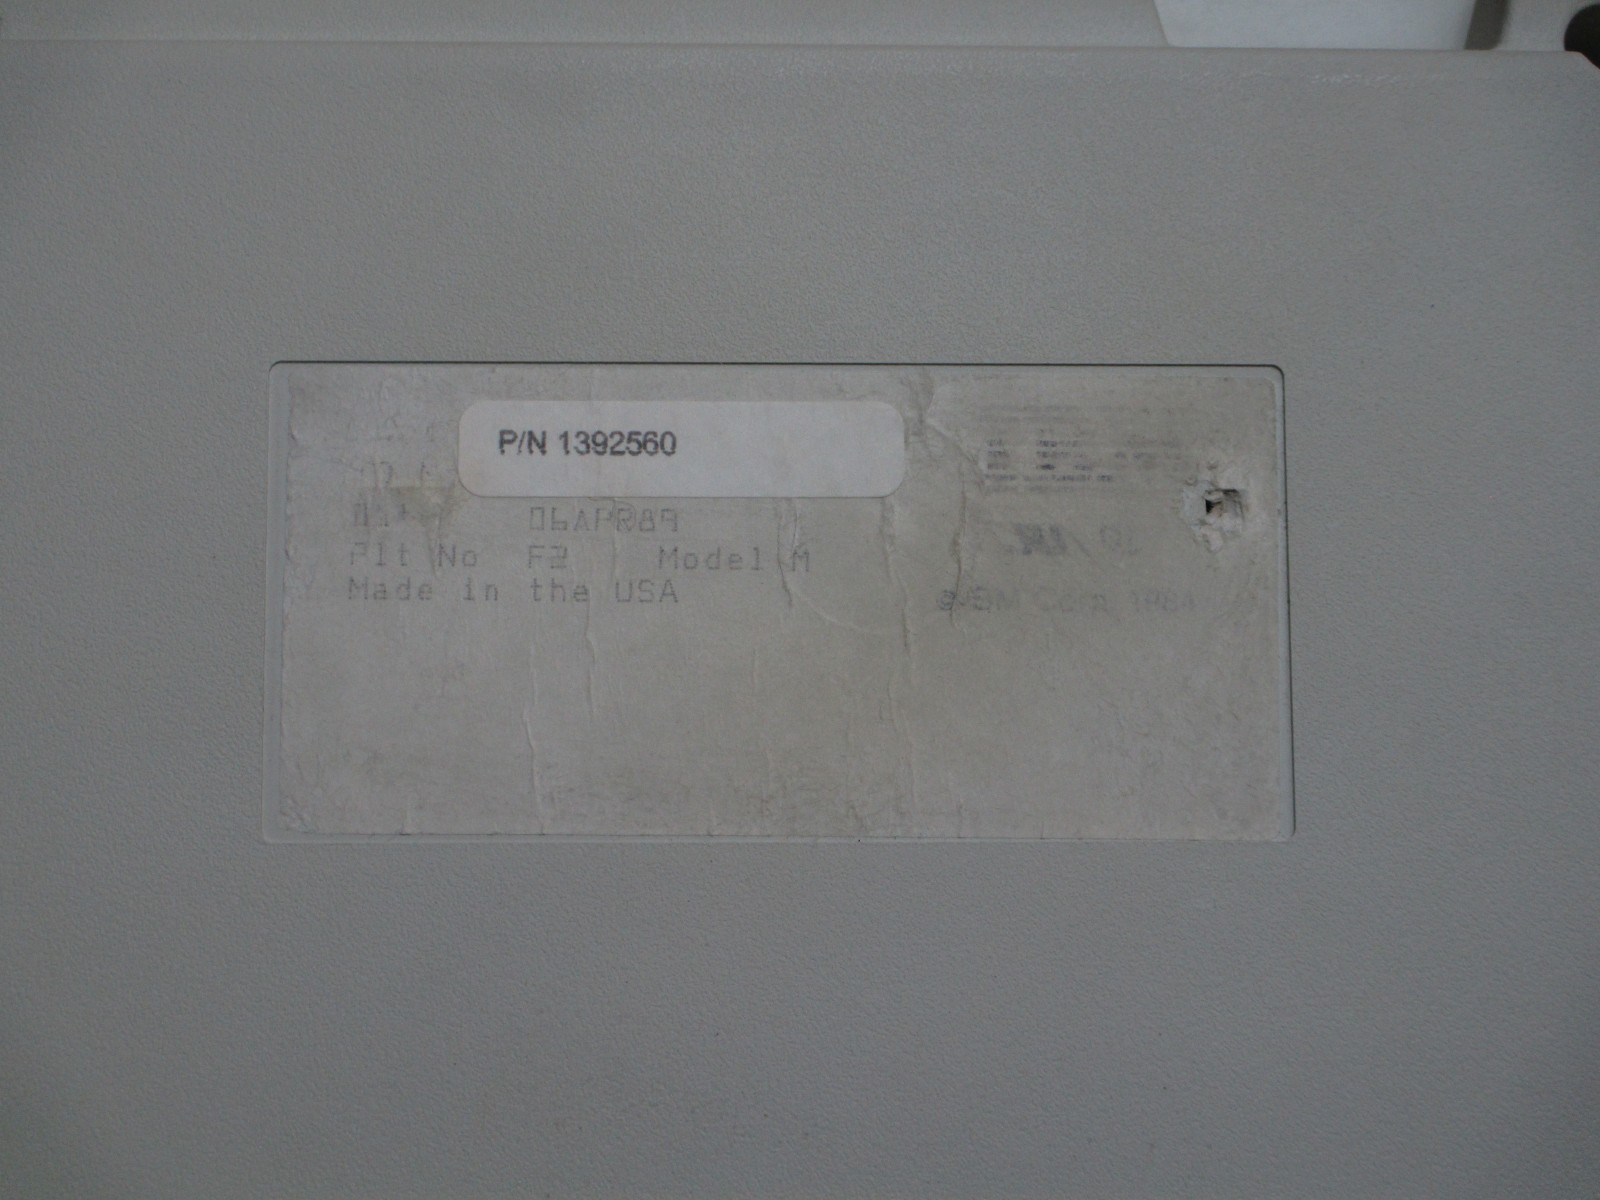 IBM Modem M 4704-Model-100-like, label (tampered with, but what the heck).